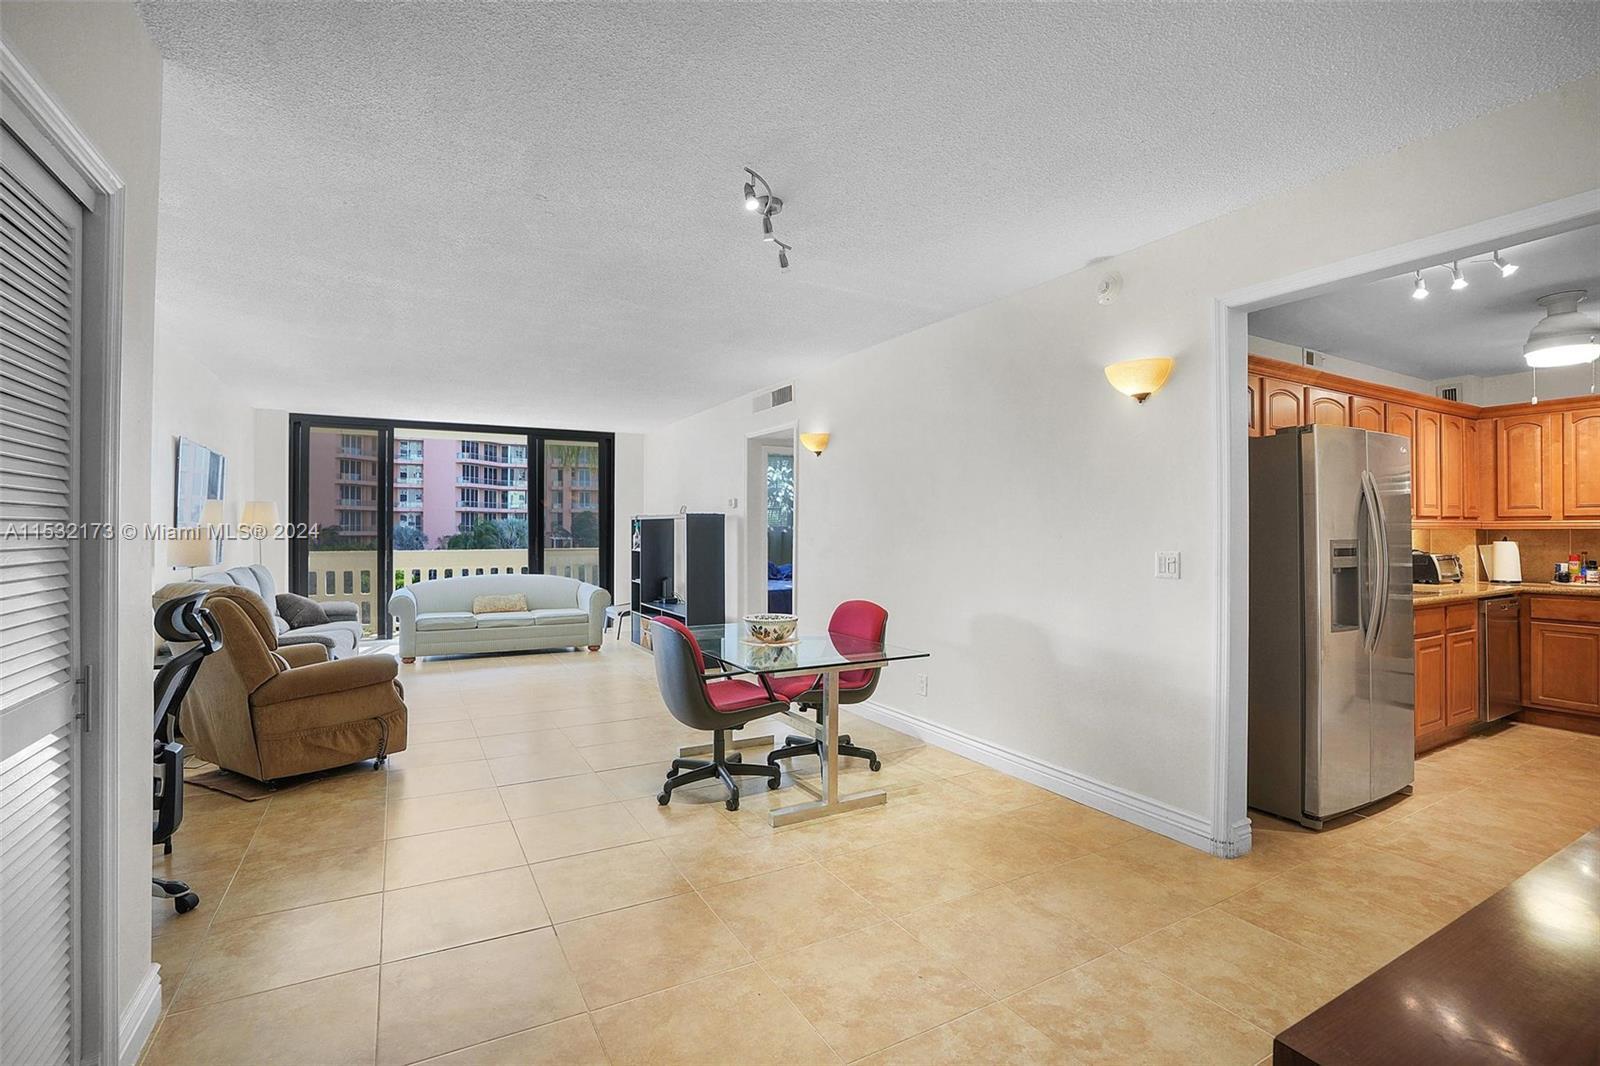 Photo of 90 Edgewater Dr #418 in Coral Gables, FL